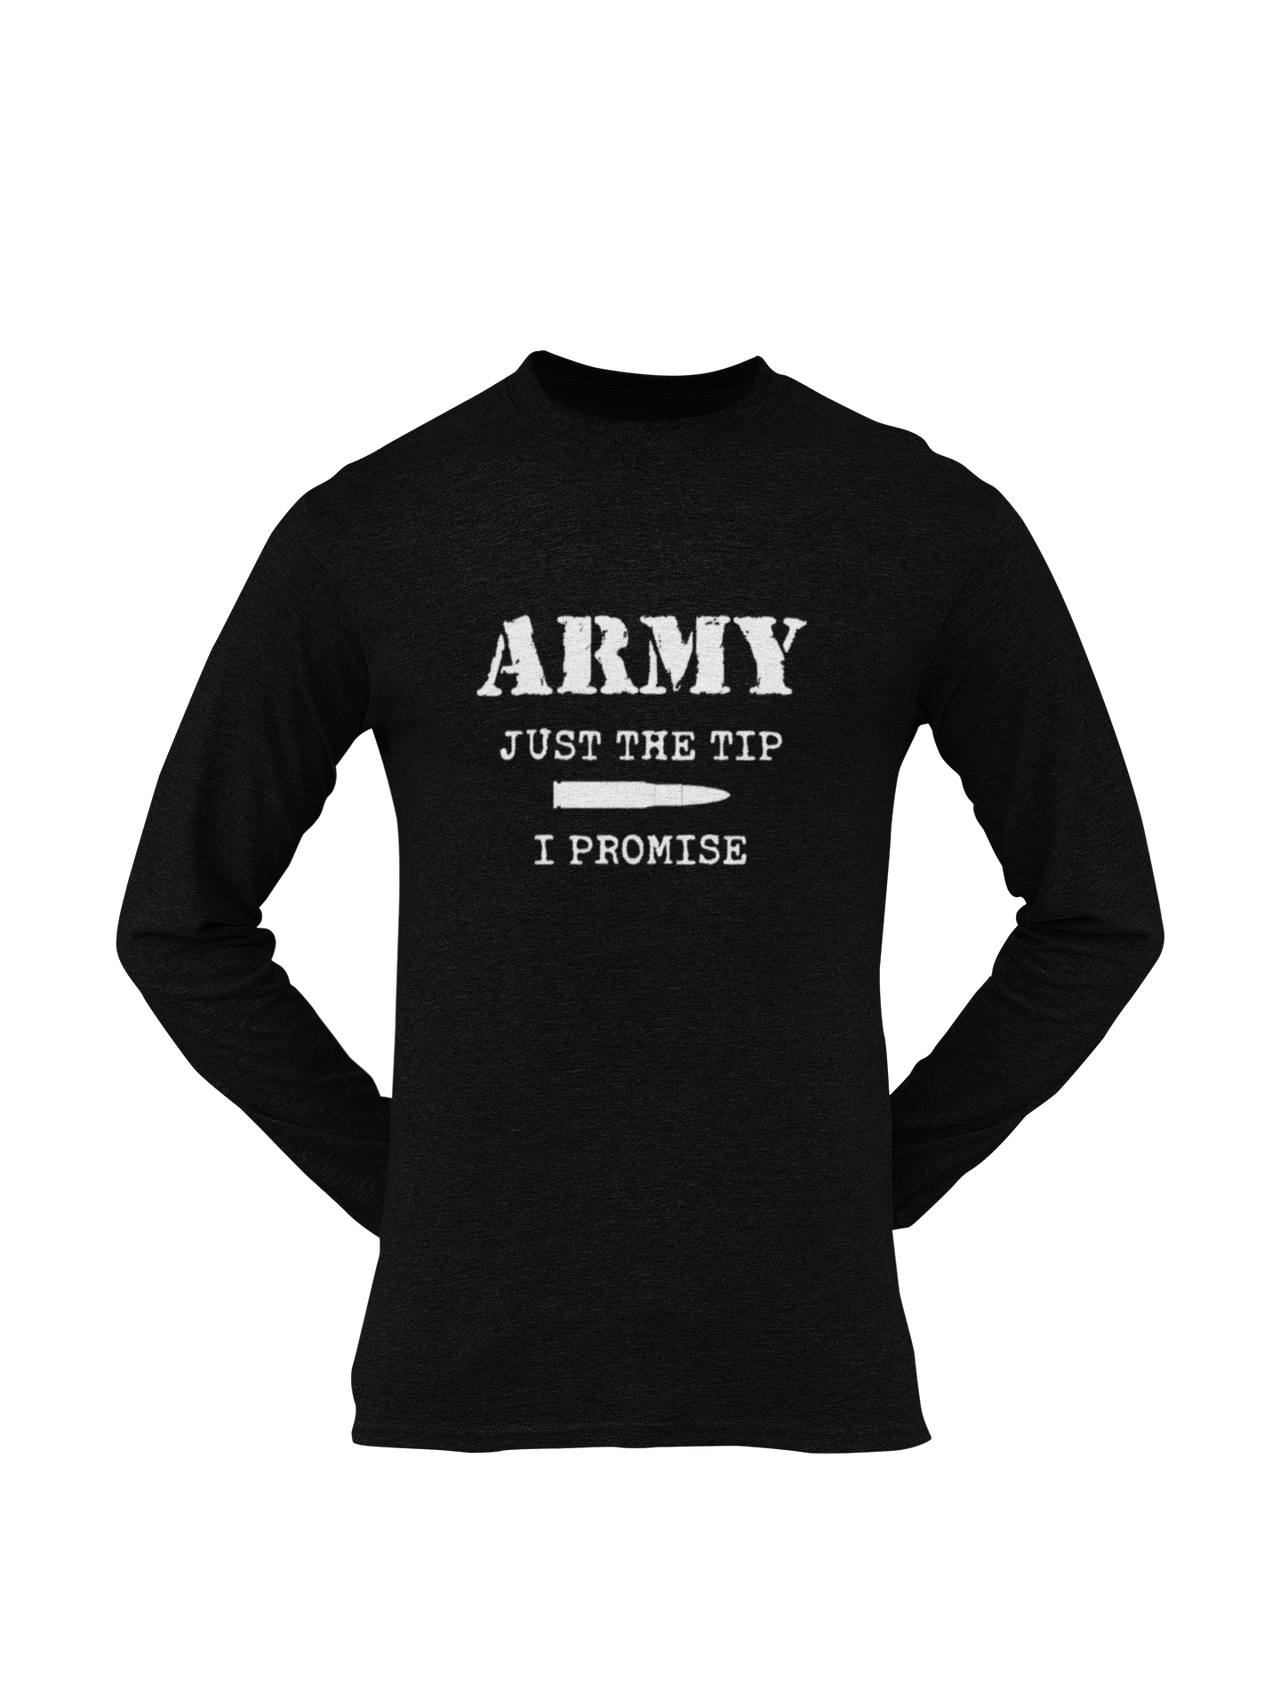 Army T-shirt - Just the Tip, I Promise (Men)